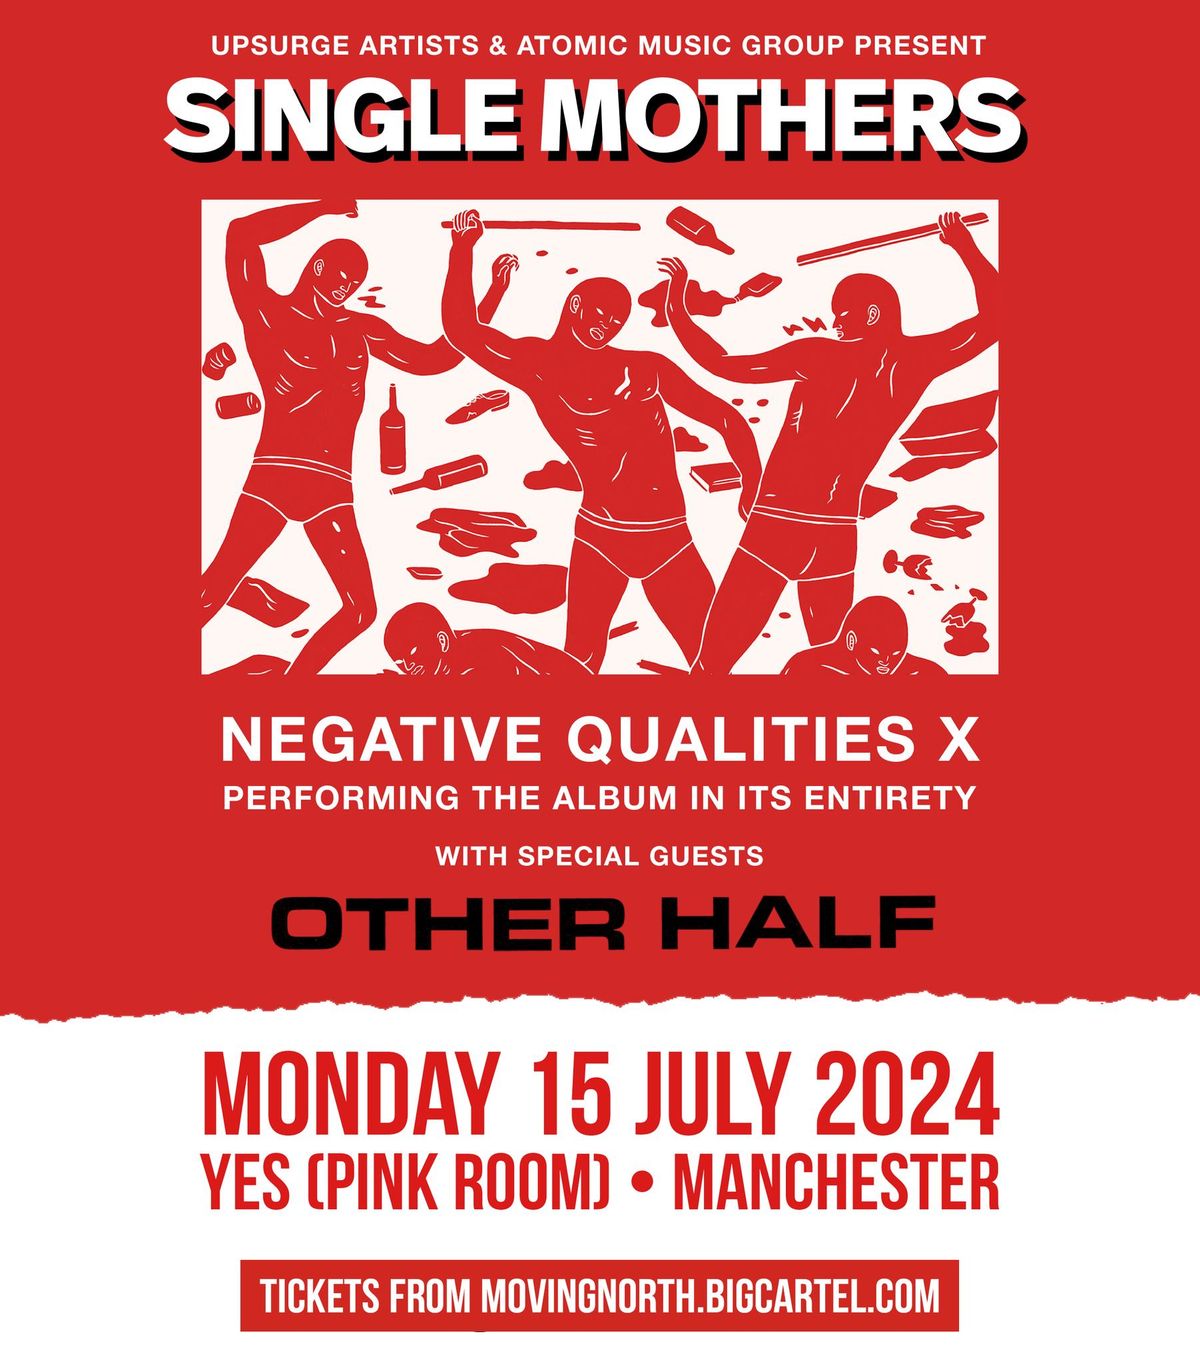 Single Mothers - YES (Pink Room), Manchester - Monday 15 July 2024